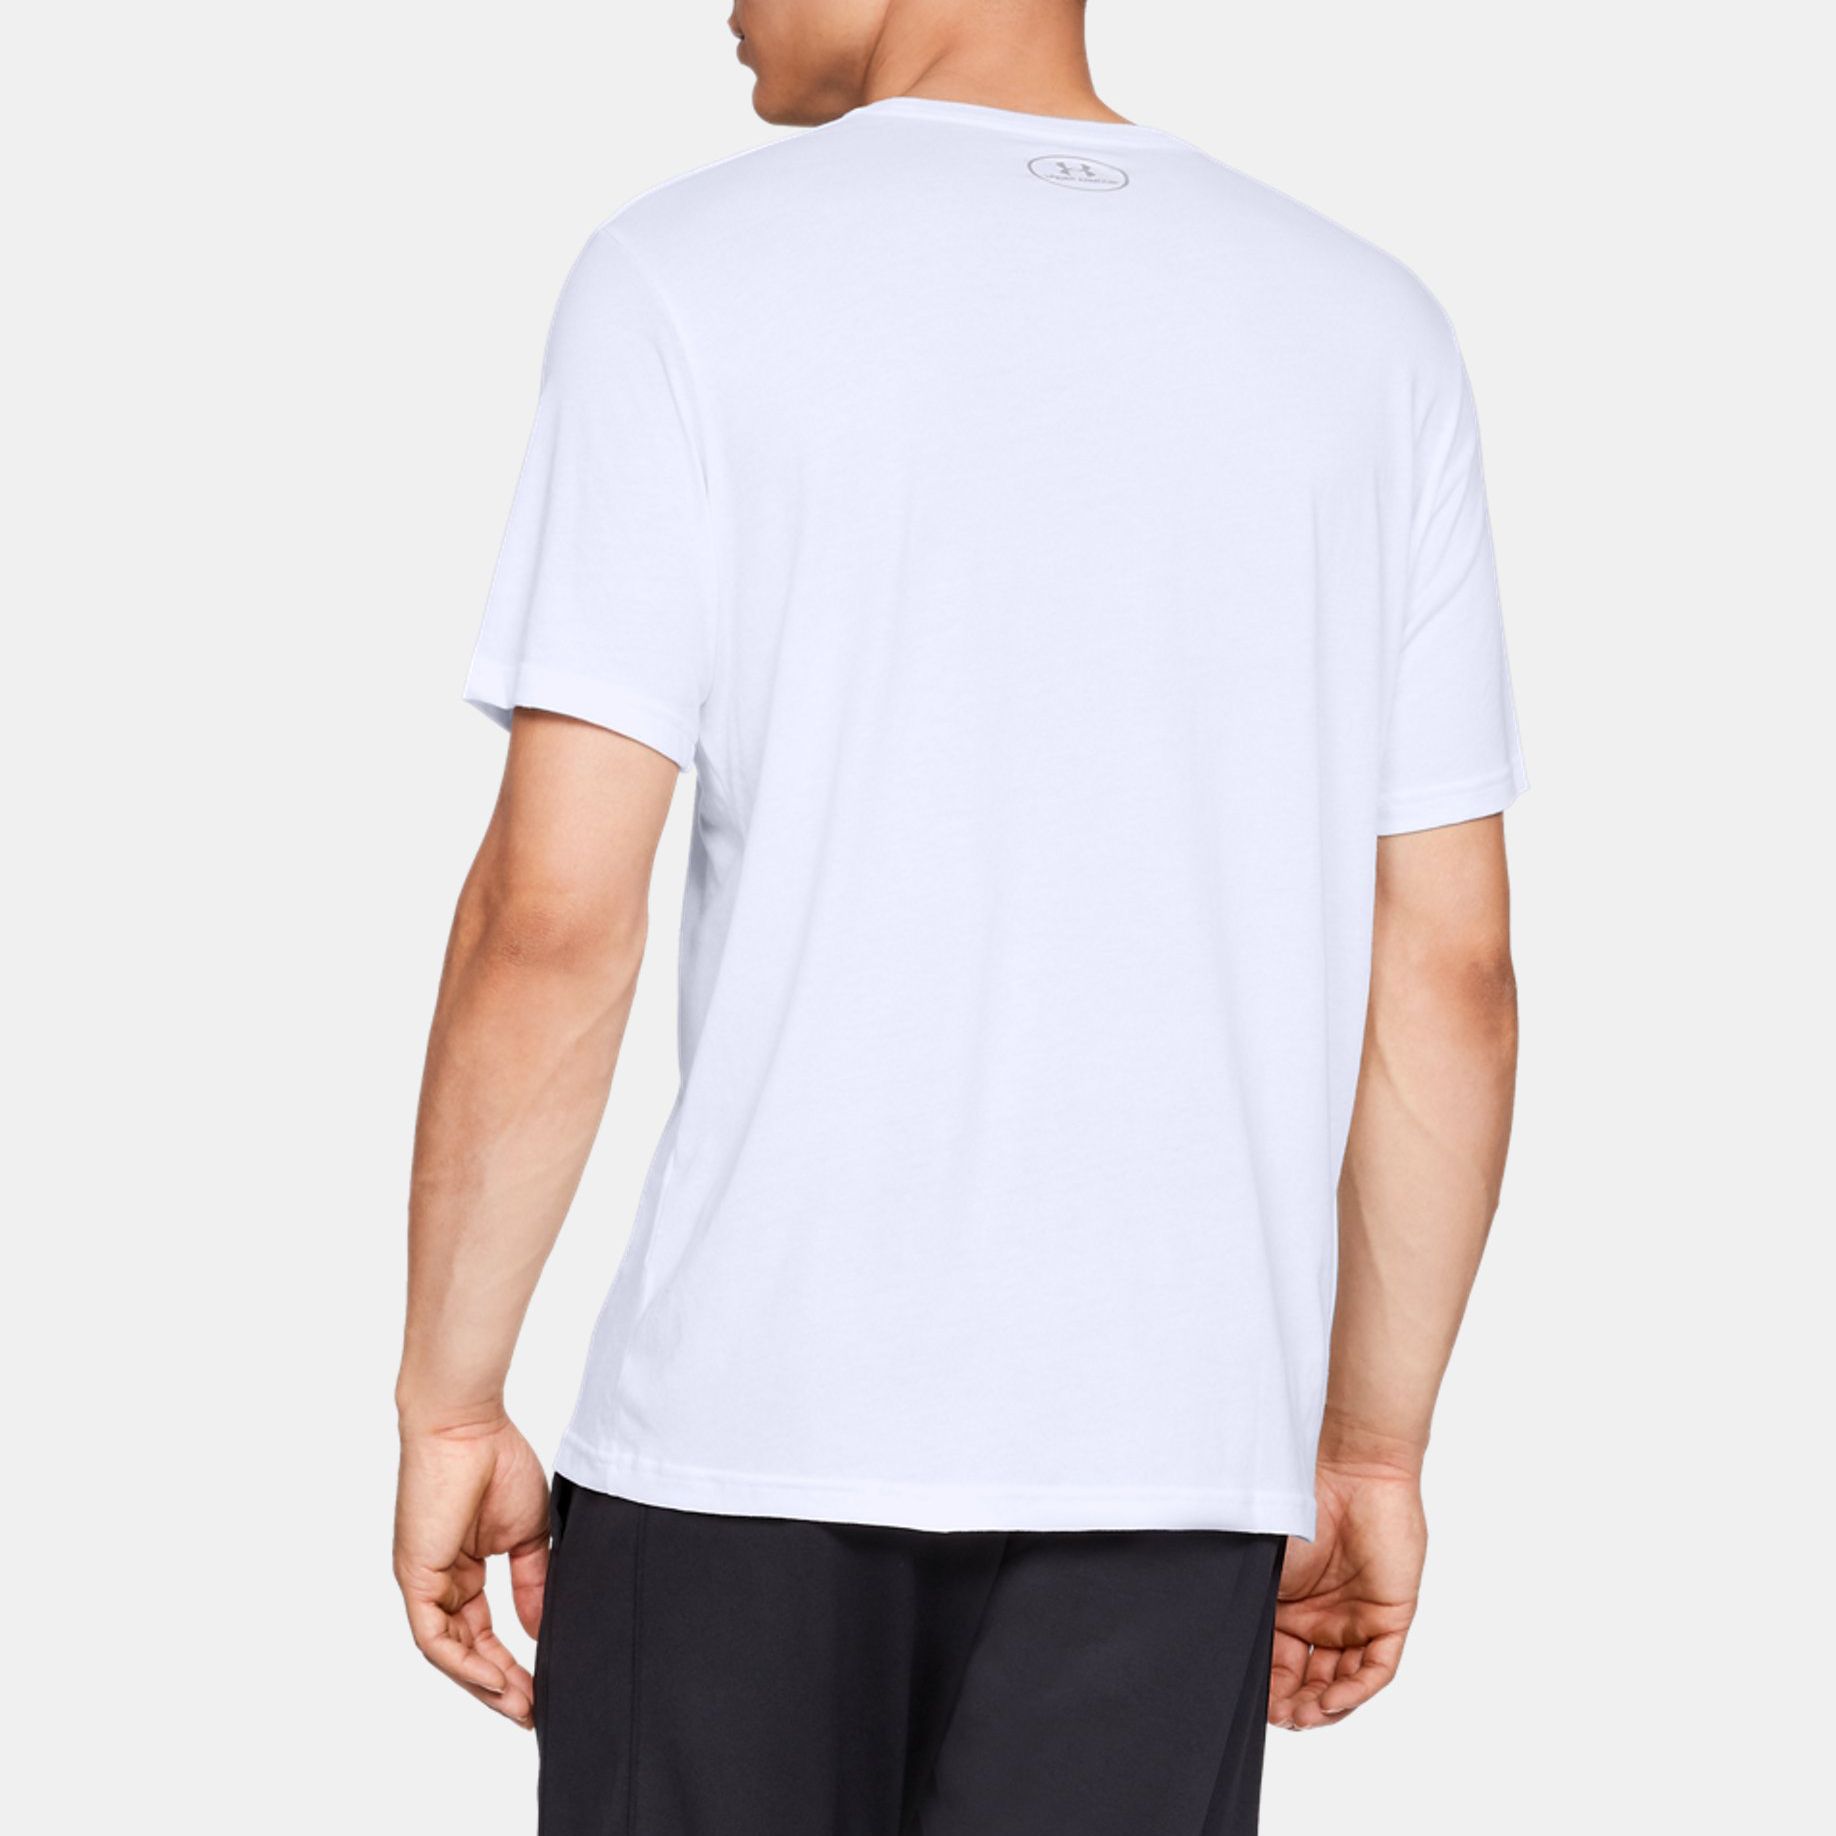 Loose: Fuller cut for complete comfort
Charged Cotton® has the comfort of cotton, but dries much faster
4-way stretch construction moves better in every direction
Material wicks sweat & dries really fast